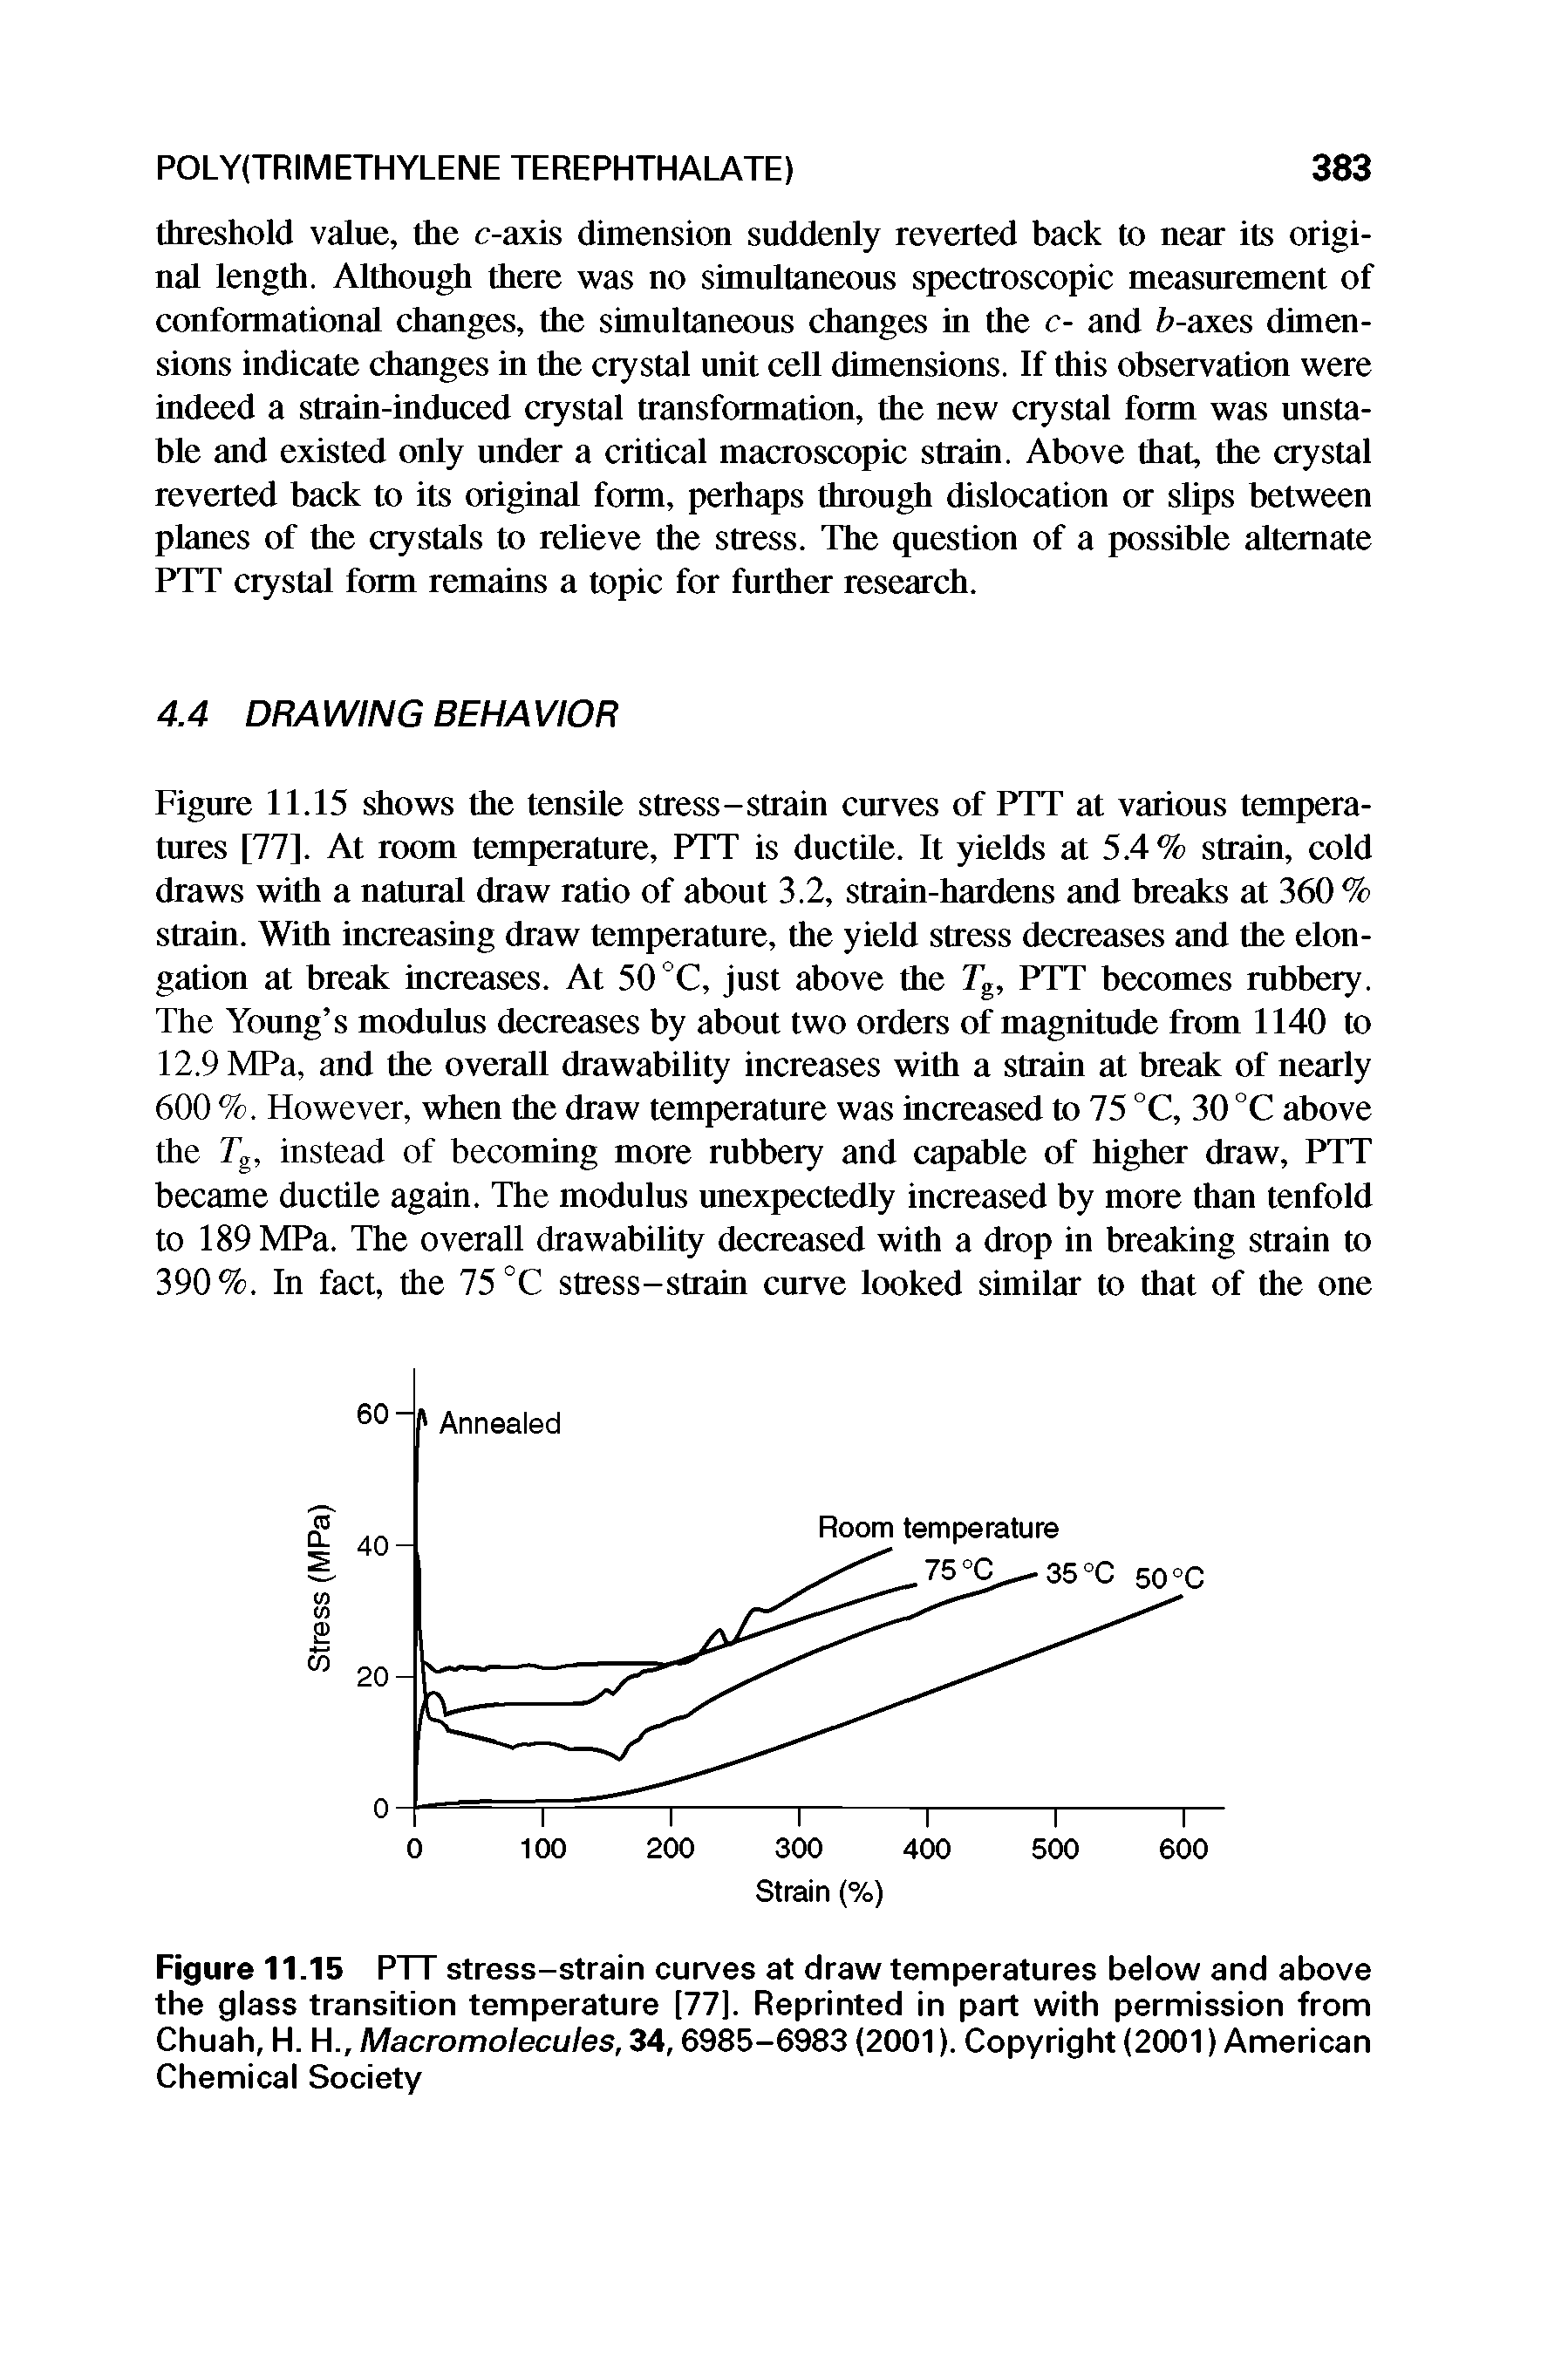 Figure 11.15 PTT stress-strain curves at draw temperatures below and above the glass transition temperature [77]. Reprinted in part with permission from Chuah, H. H., Macromolecules, 34,6985-6983 (2001). Copyright (2001) American Chemical Society...